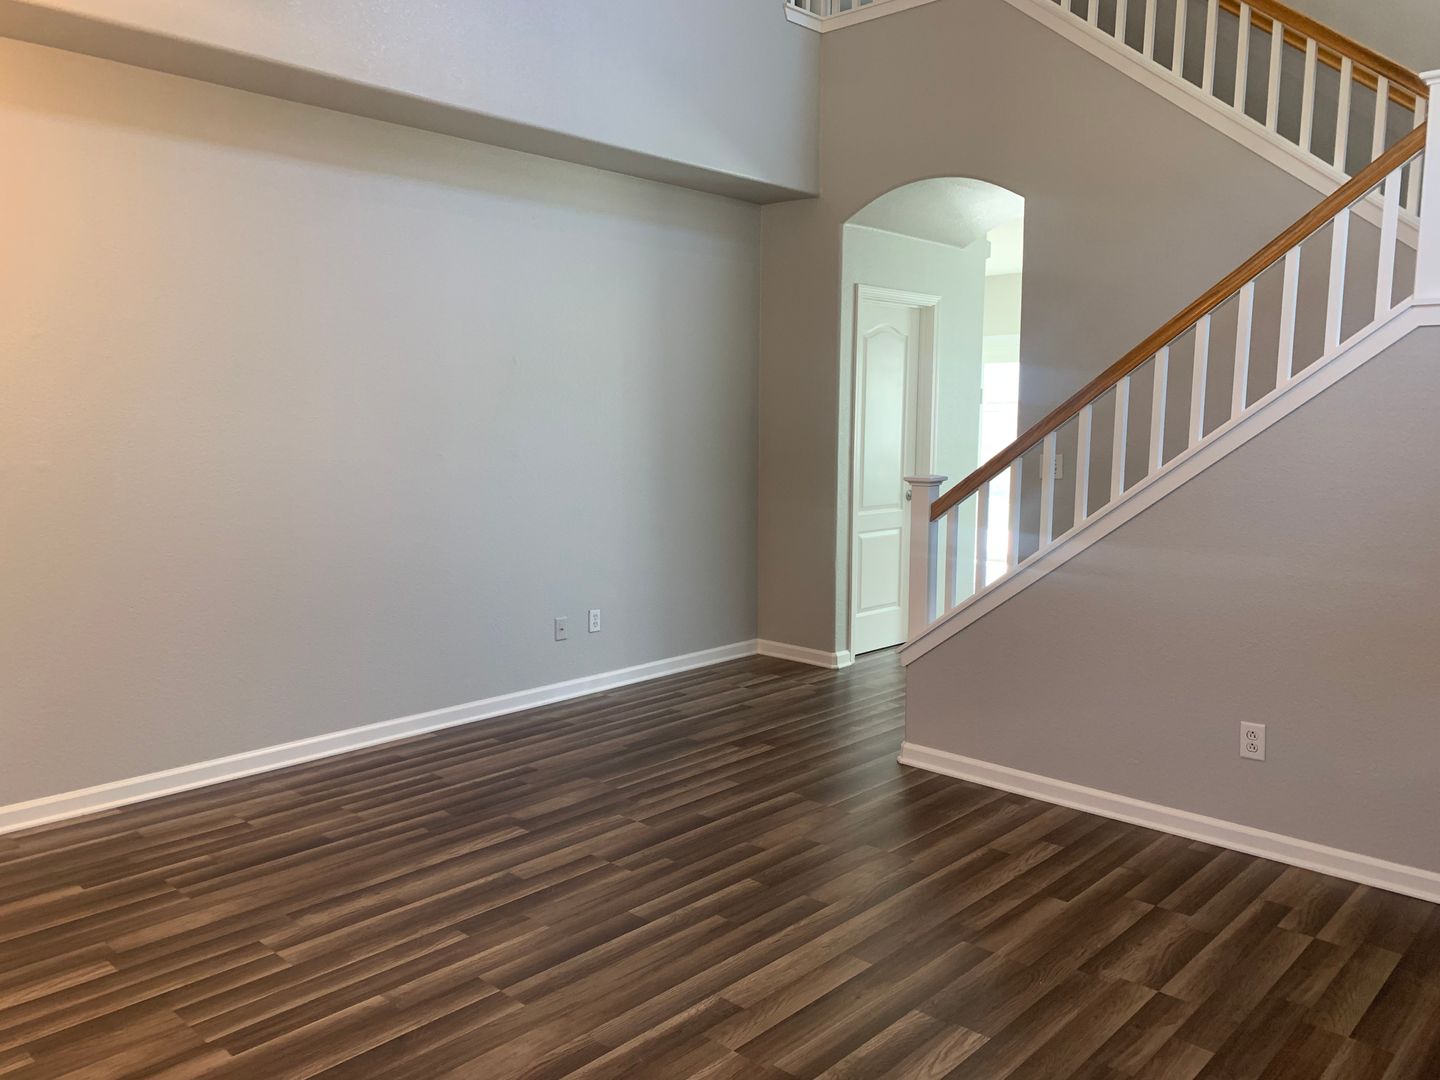 New Paint and Flooring in Terrific Brentwood Location!